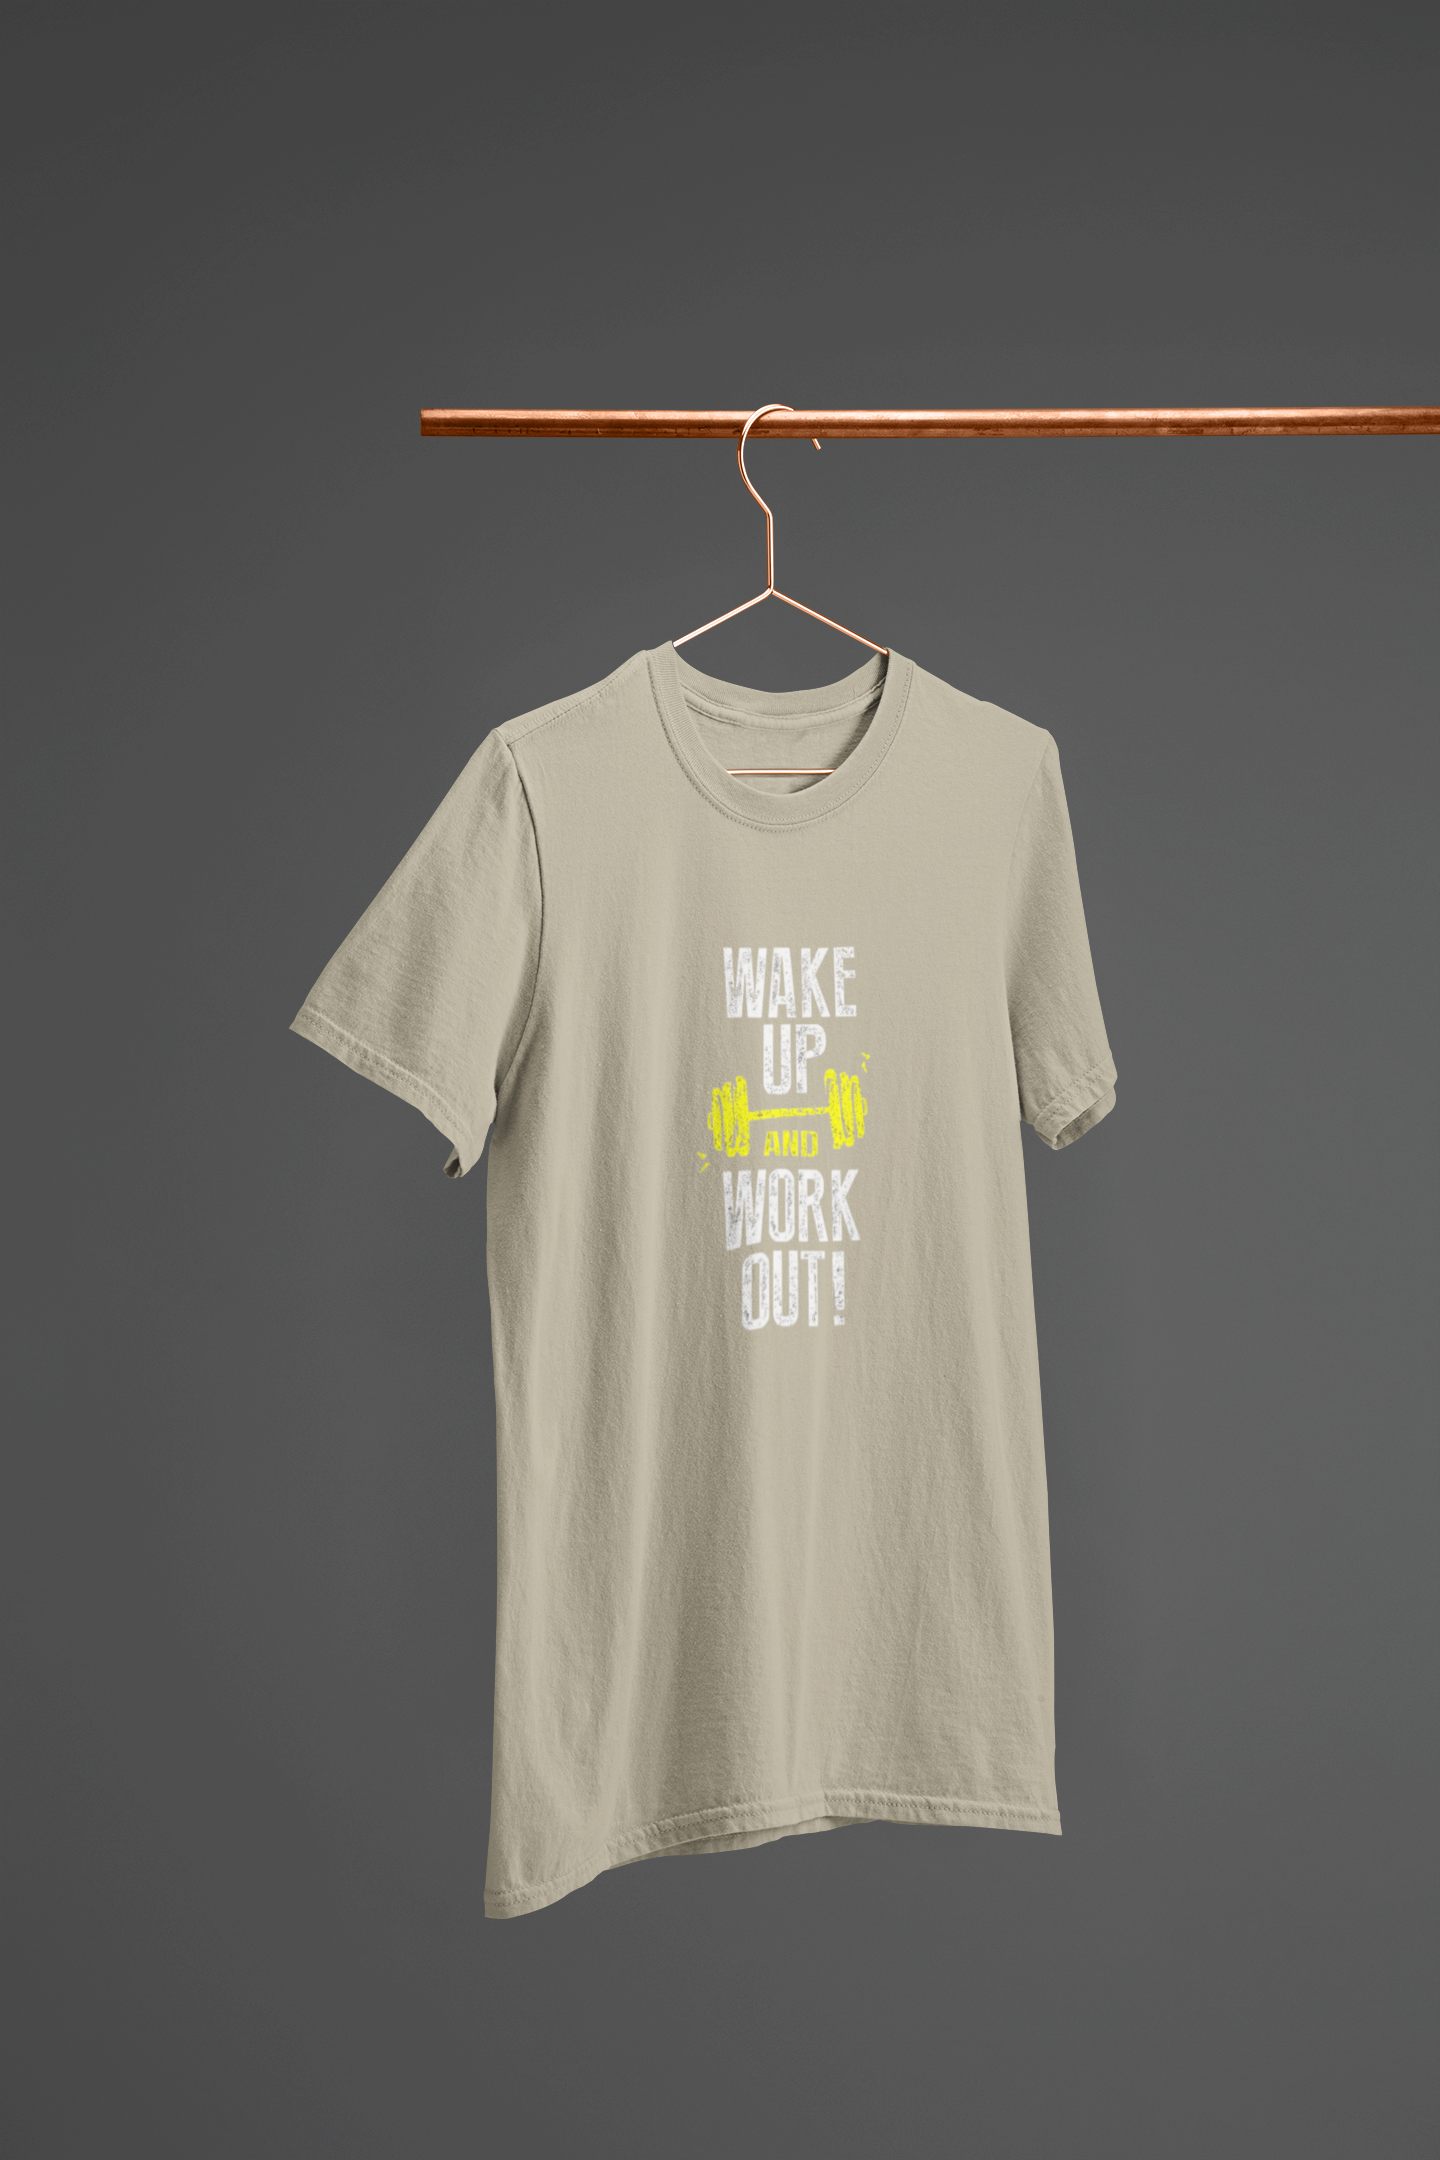 Wake Up and Work Out 100% Cotton T-Shirt